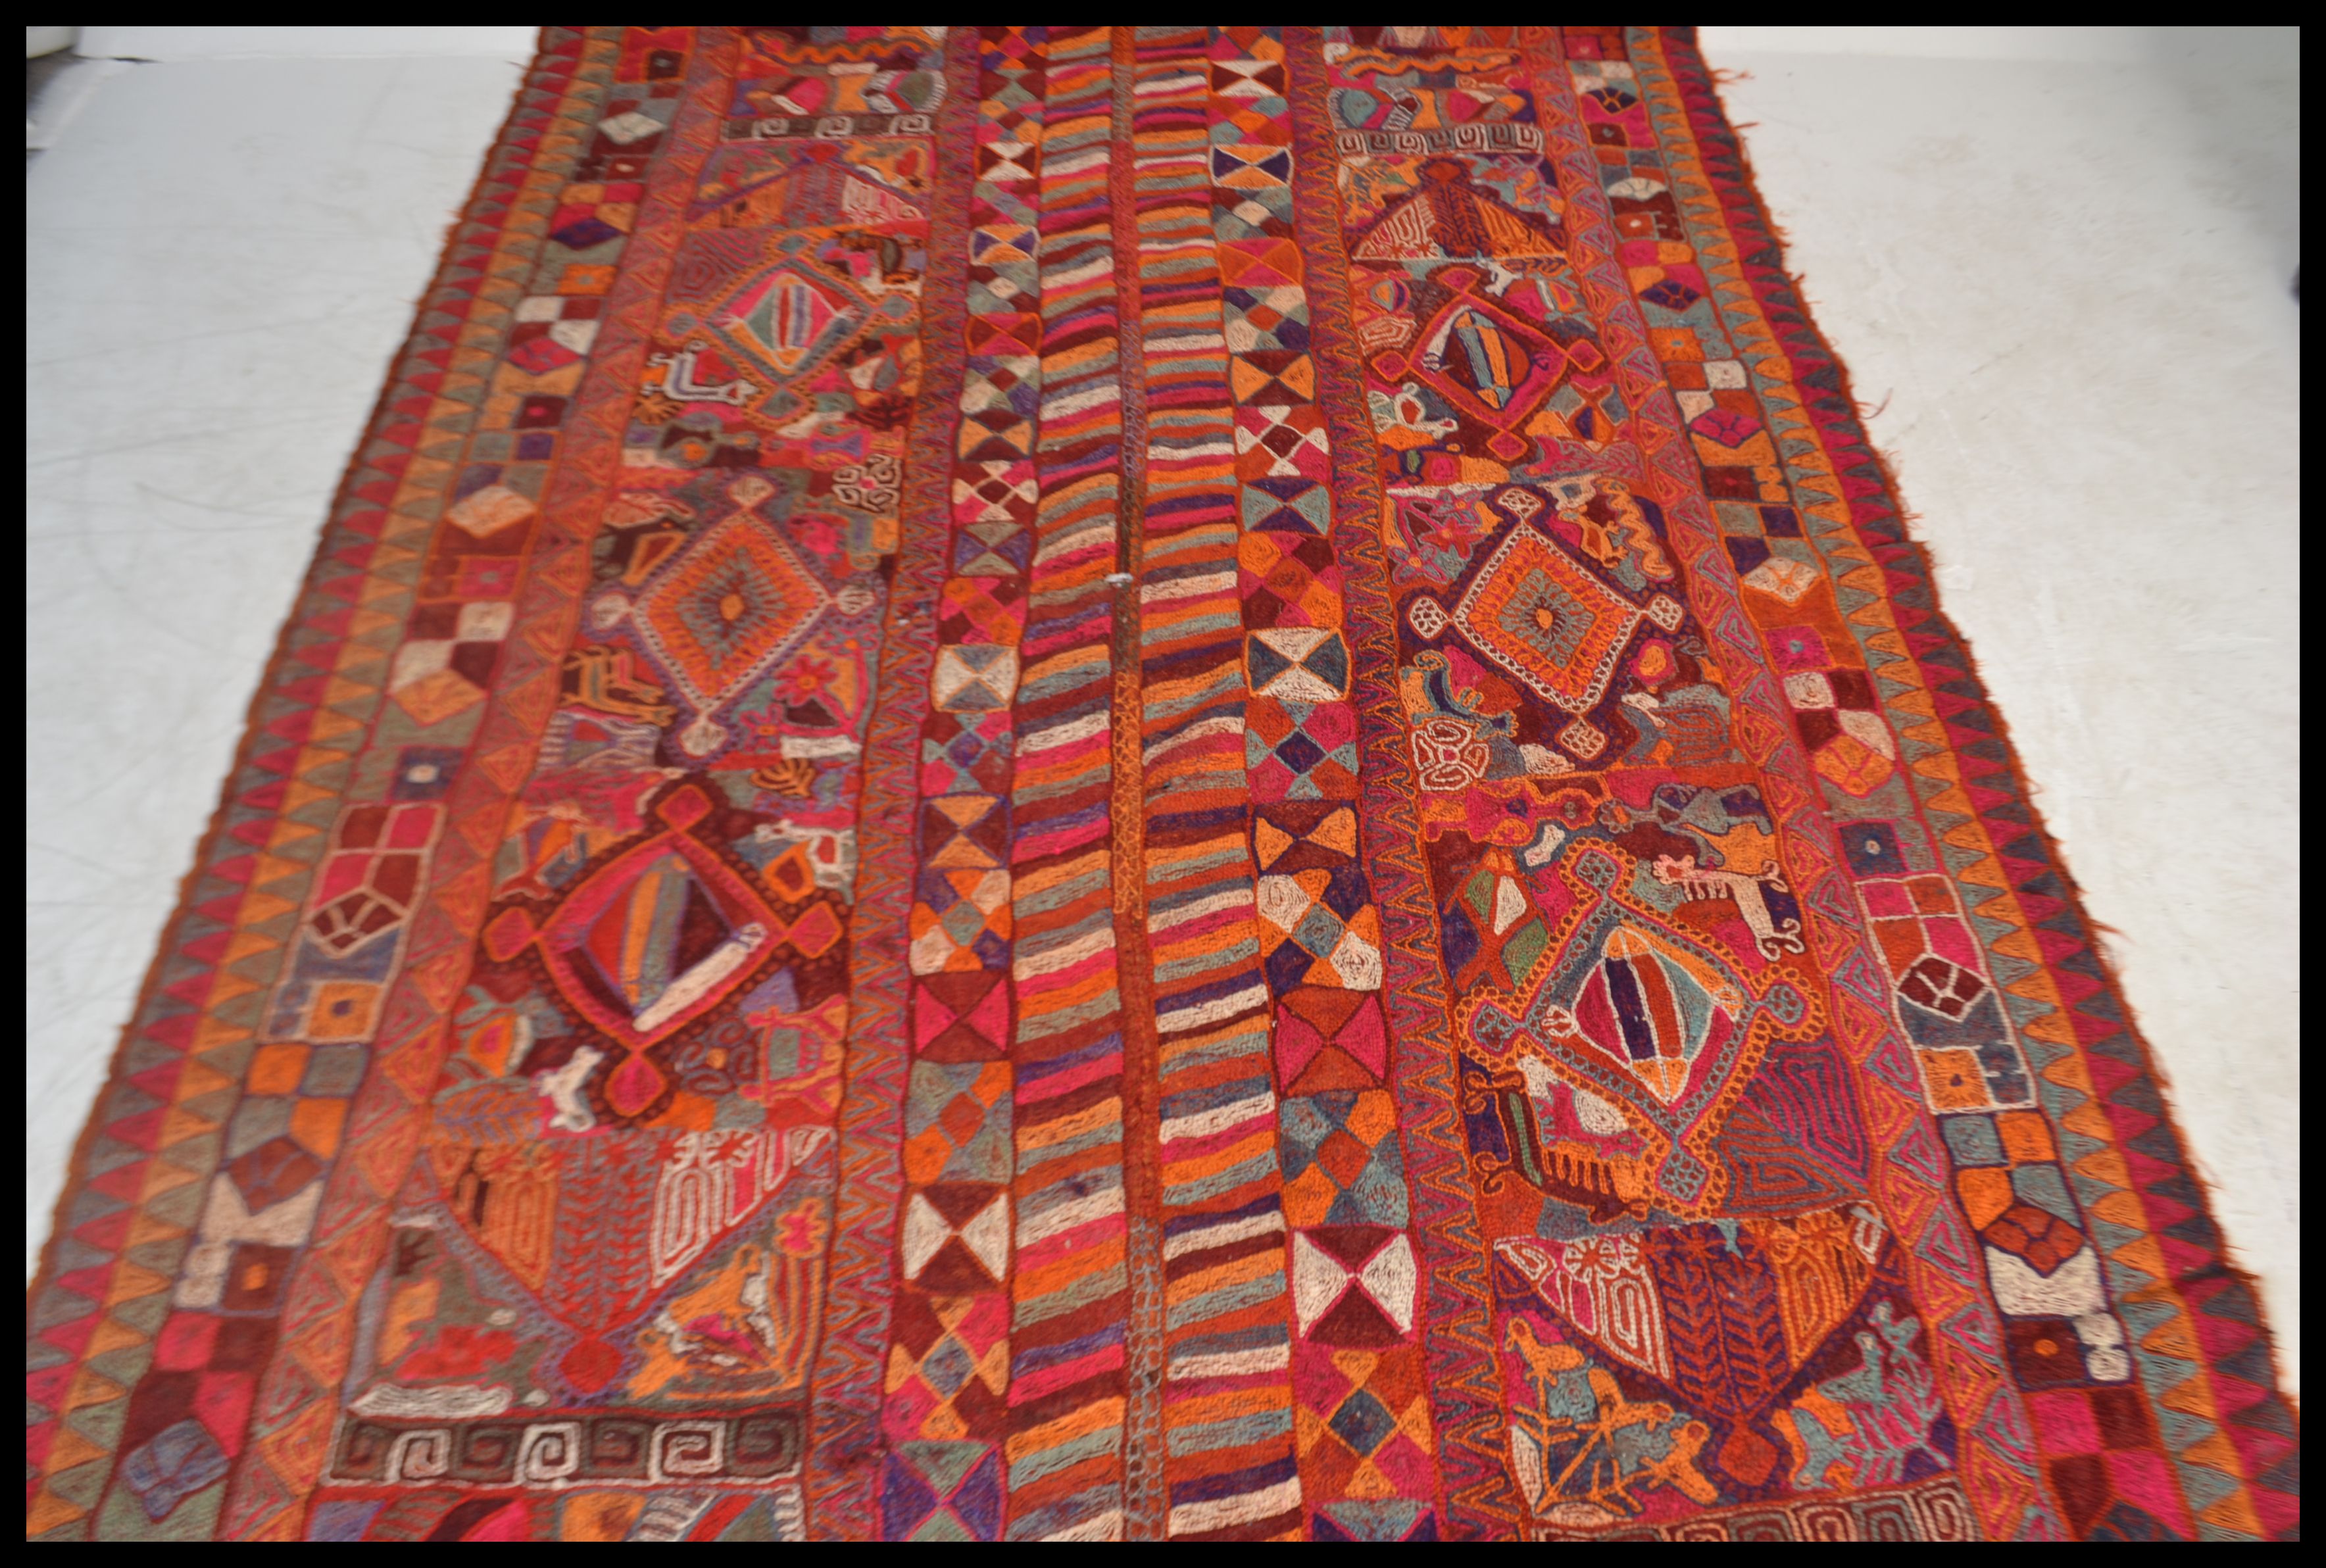 A  stunning large ethnic tribal carpet rug of handwoven bright vivid form, constructed from - Image 2 of 4